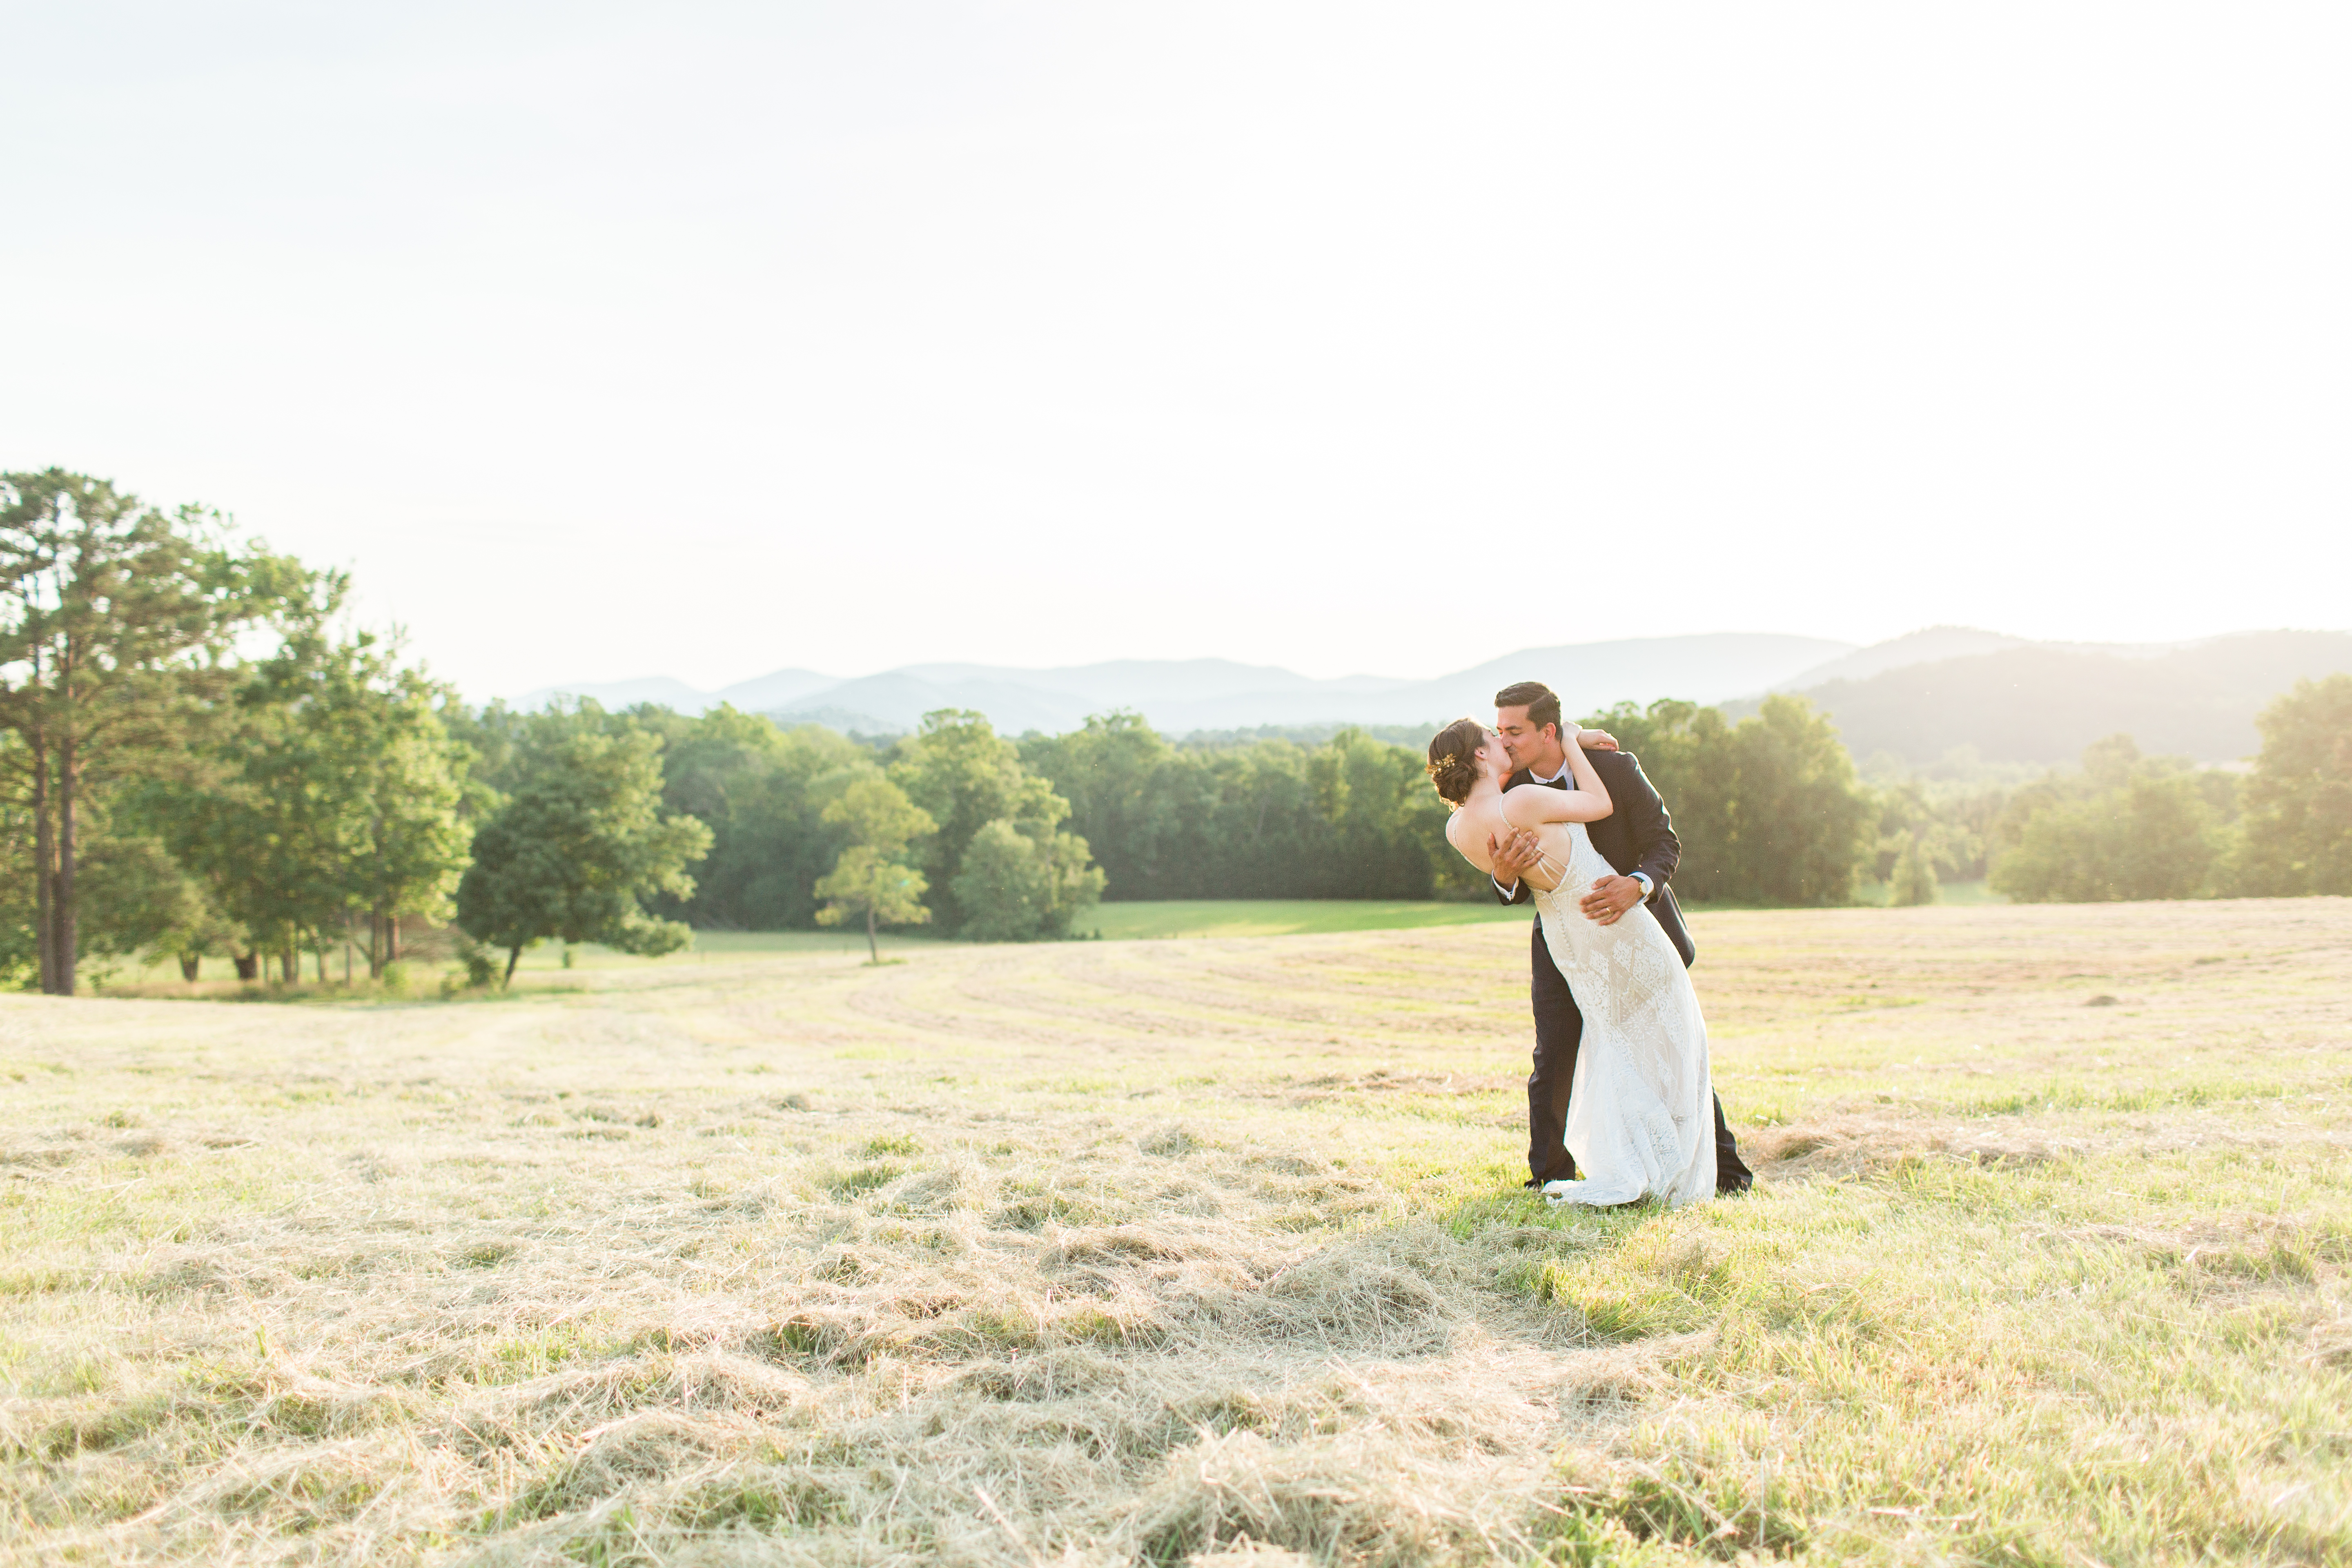 Bride and Groom kissing in a country field at sunset. Mountain skyline 